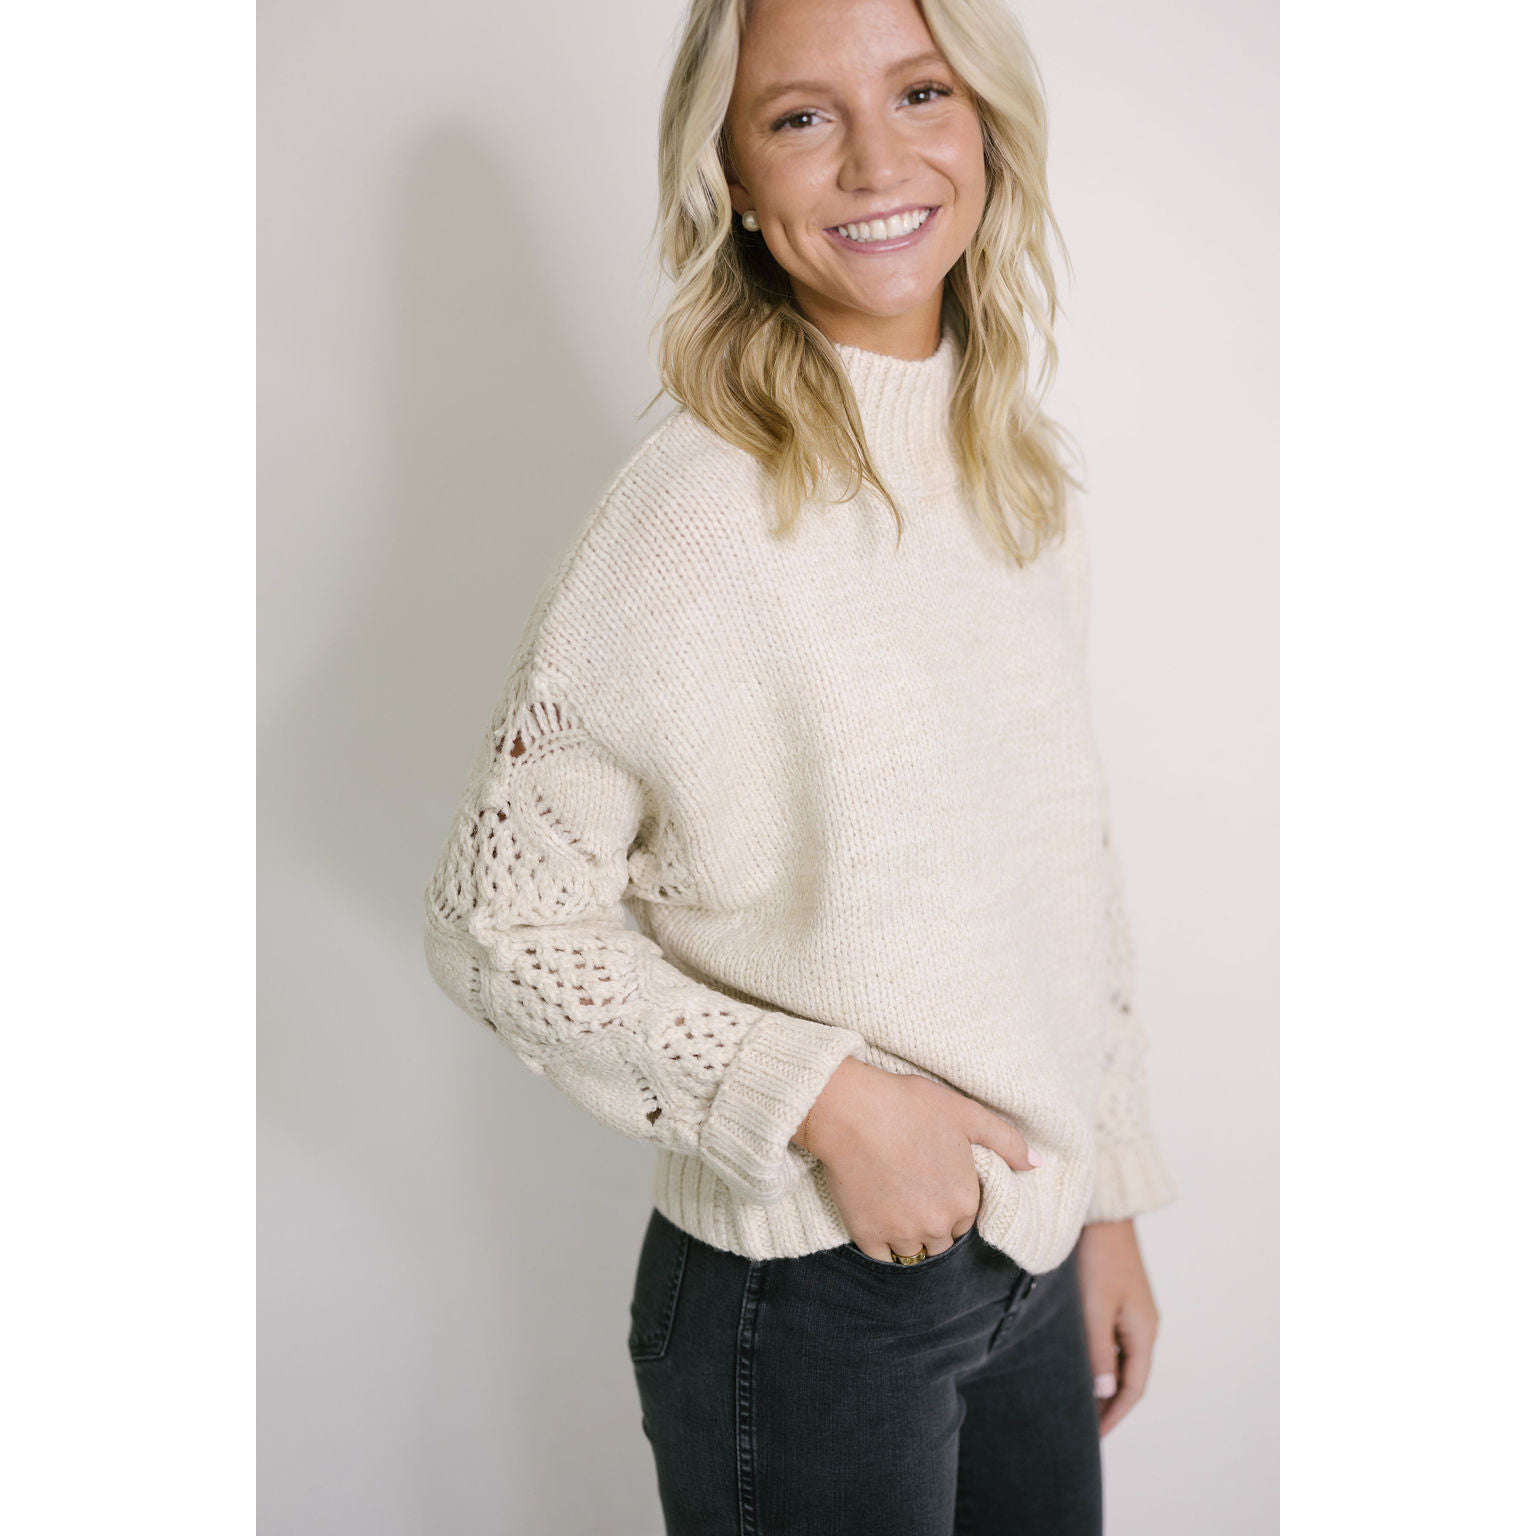 8.28 Boutique:8.28 Boutique,The Heather Mock Neck Sweater,Sweaters